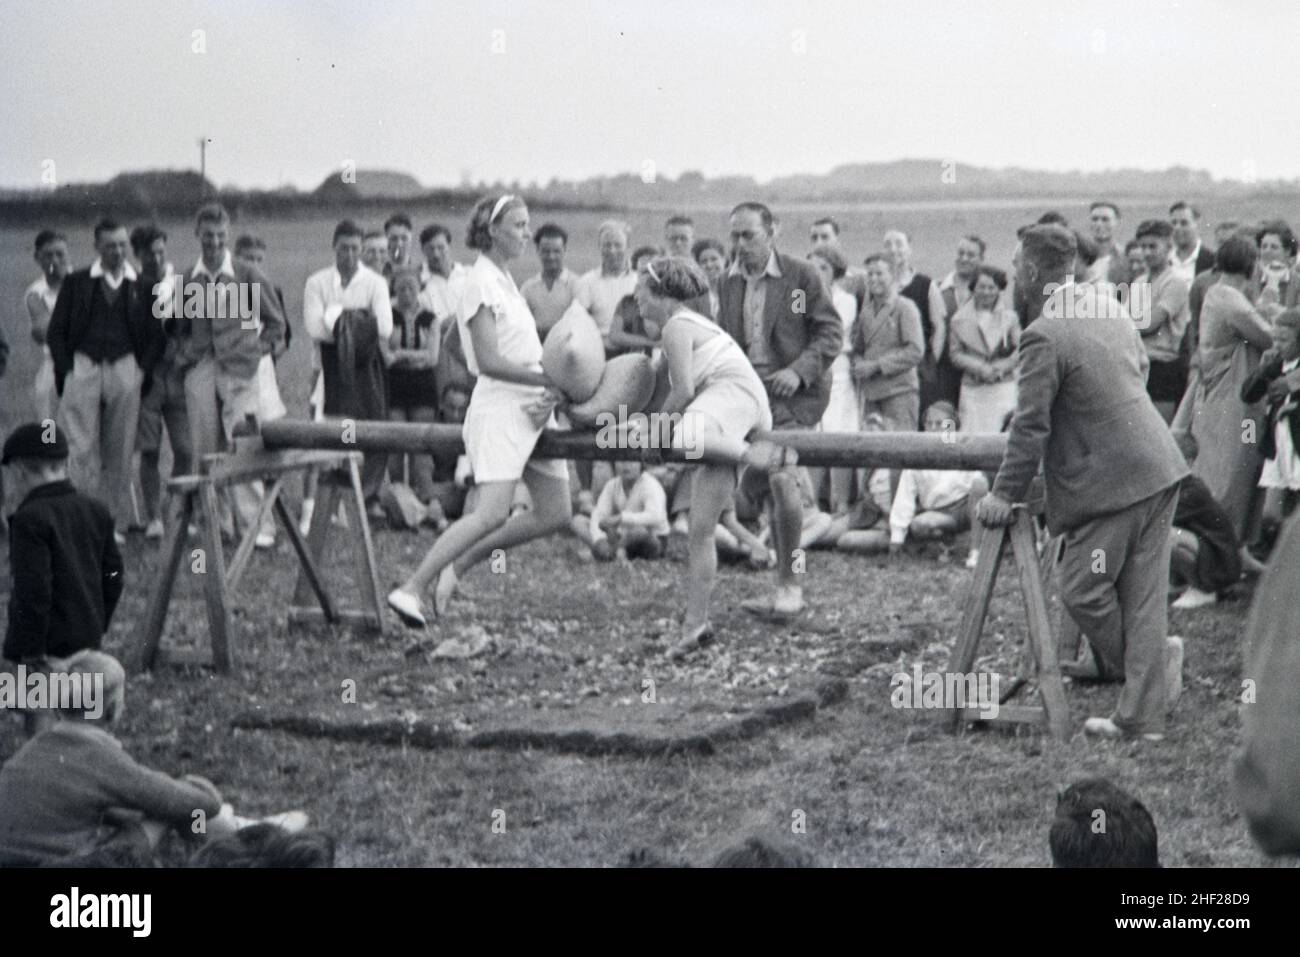 Vintage Image or Black and White Photosgraph or Spectators and Players in a Traditional Pilow Fight Game on Wooden Beam Played in an English Holiday Camp in the 1930s England Stock Photo